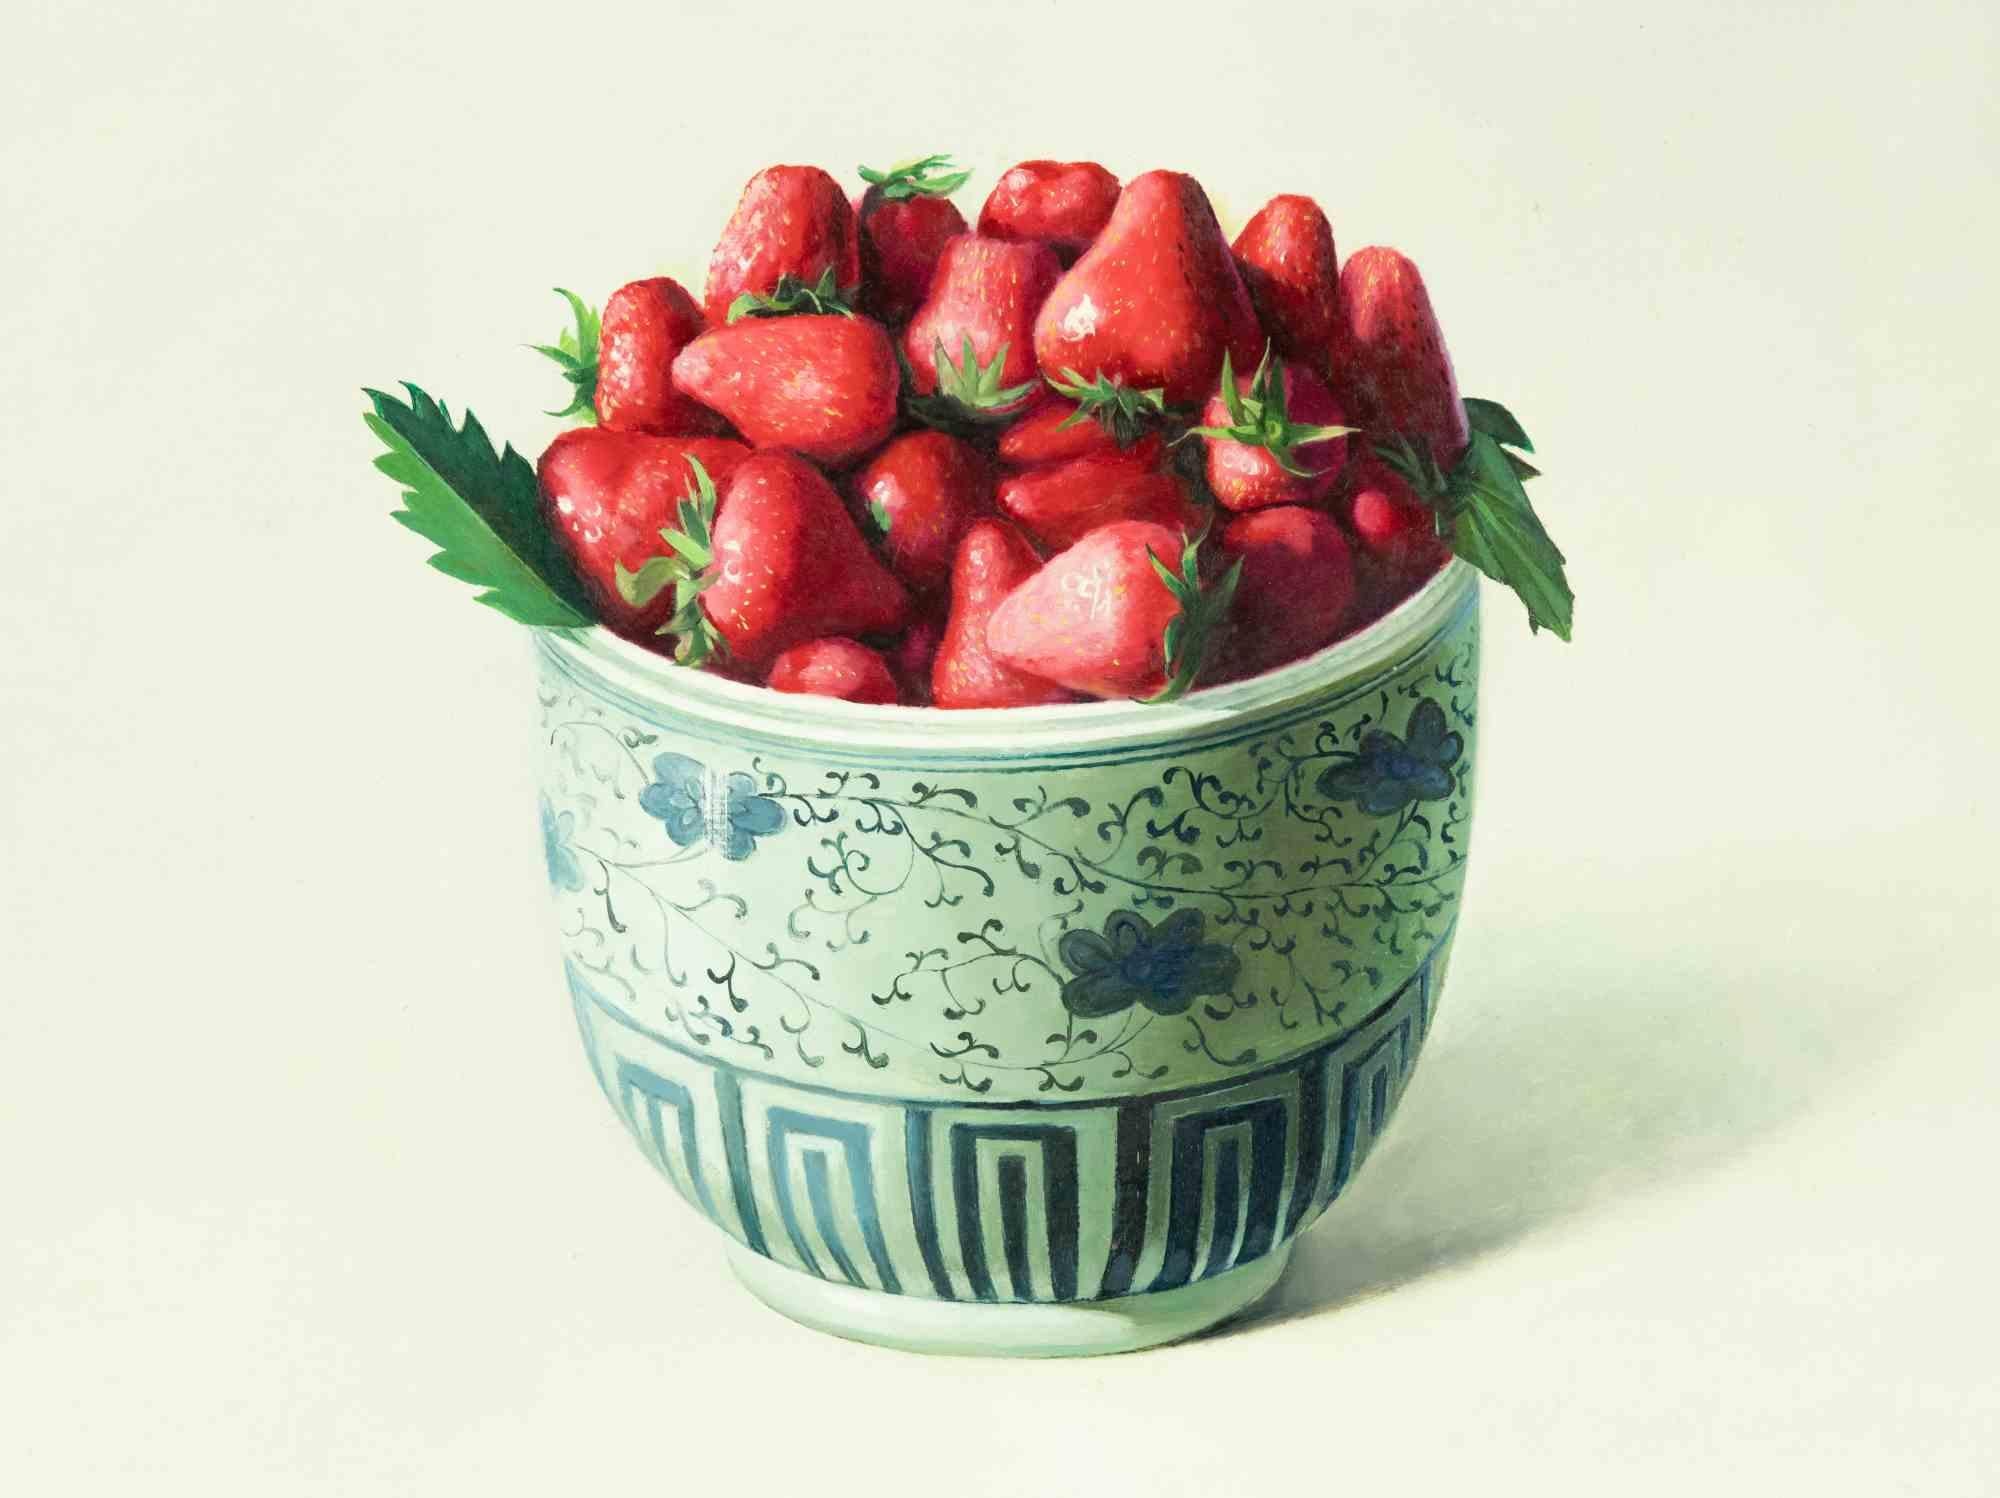 Strawberries - Painting by Zhang Wei Guang - 2007 For Sale 1